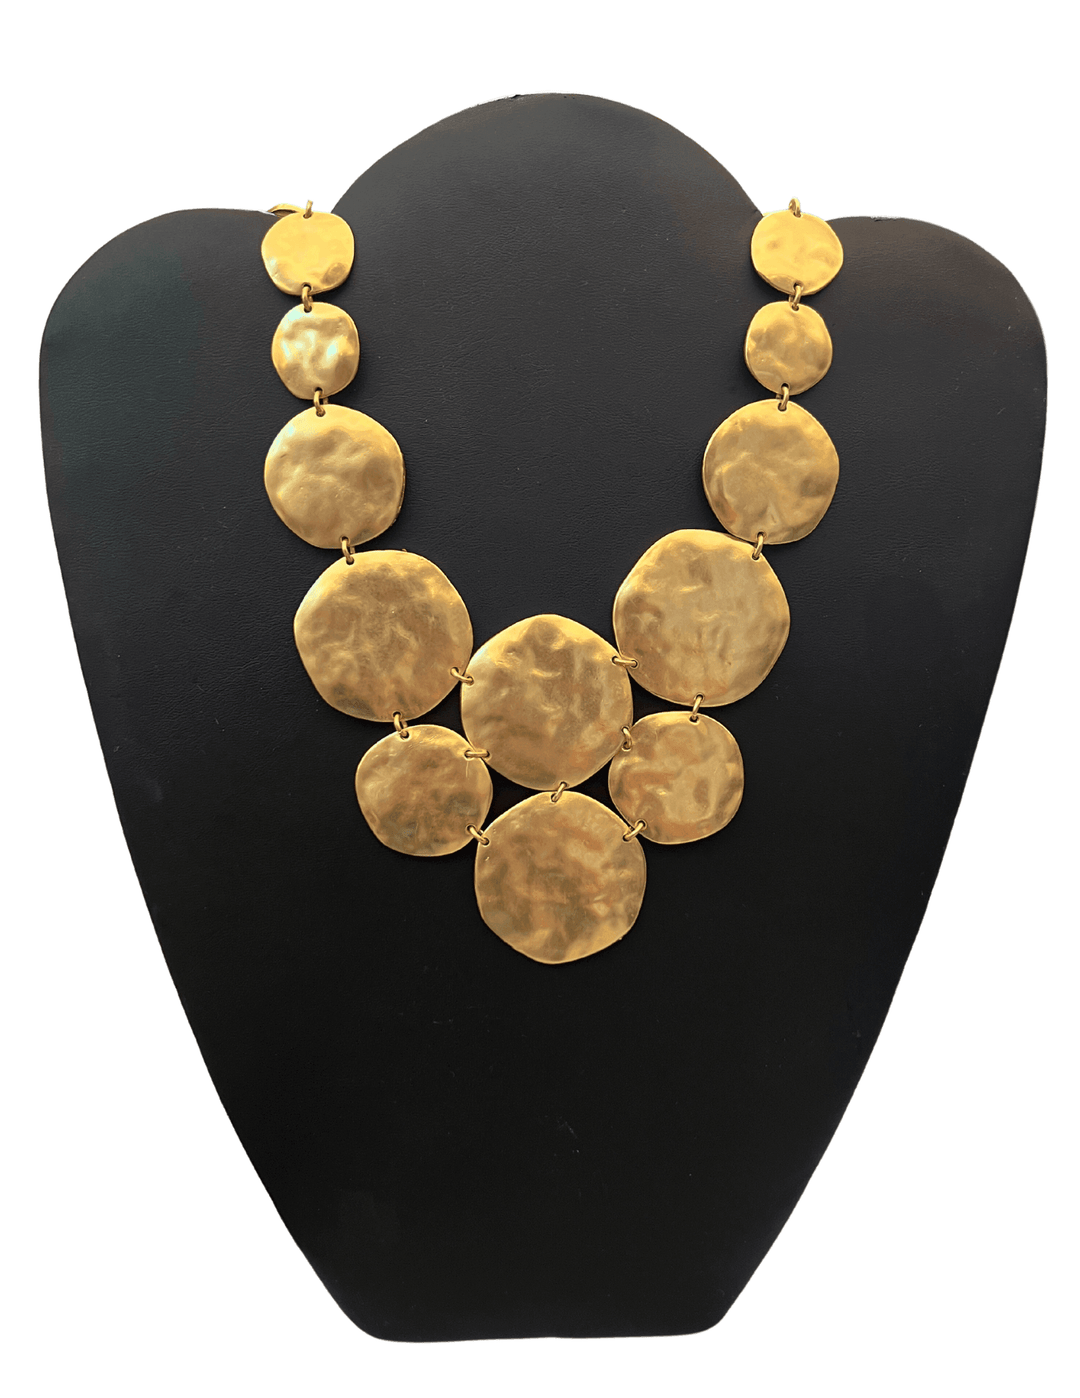 Gold v neck filler necklace inexpensive good looking jewelry